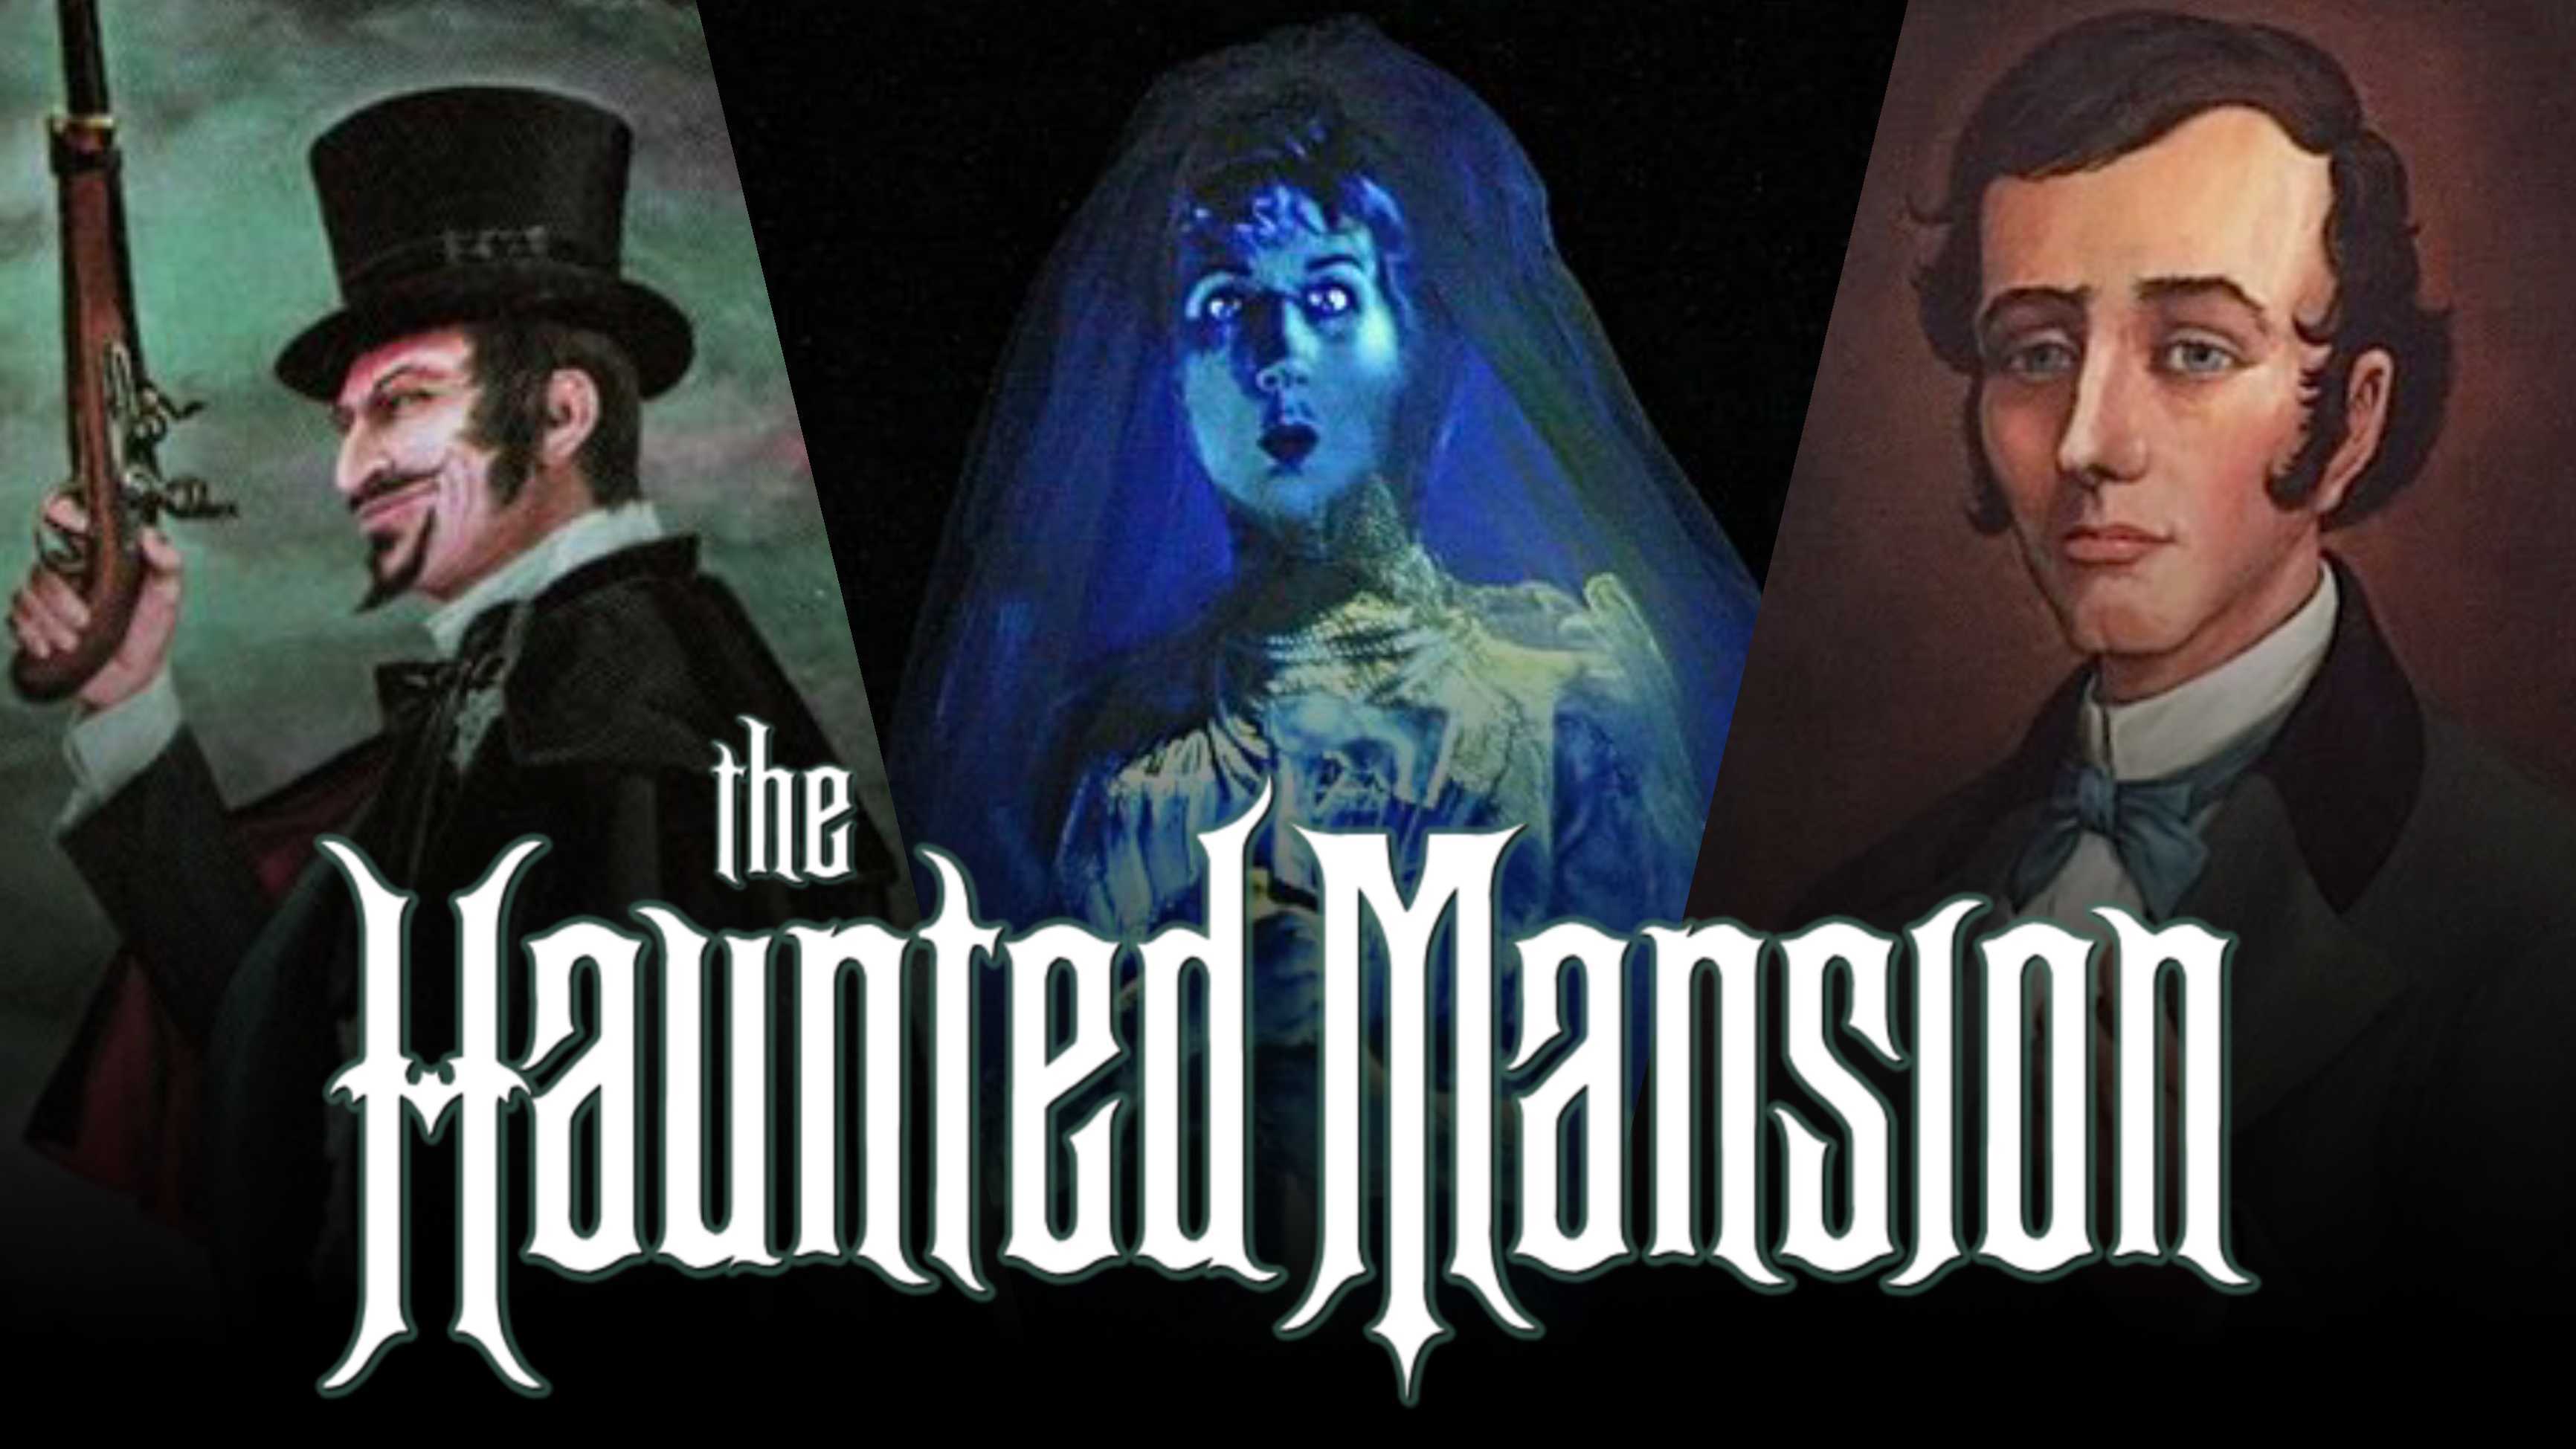 Report: Several Classic Ghosts Slated to Appear in New ‘Haunted Mansion’ Film